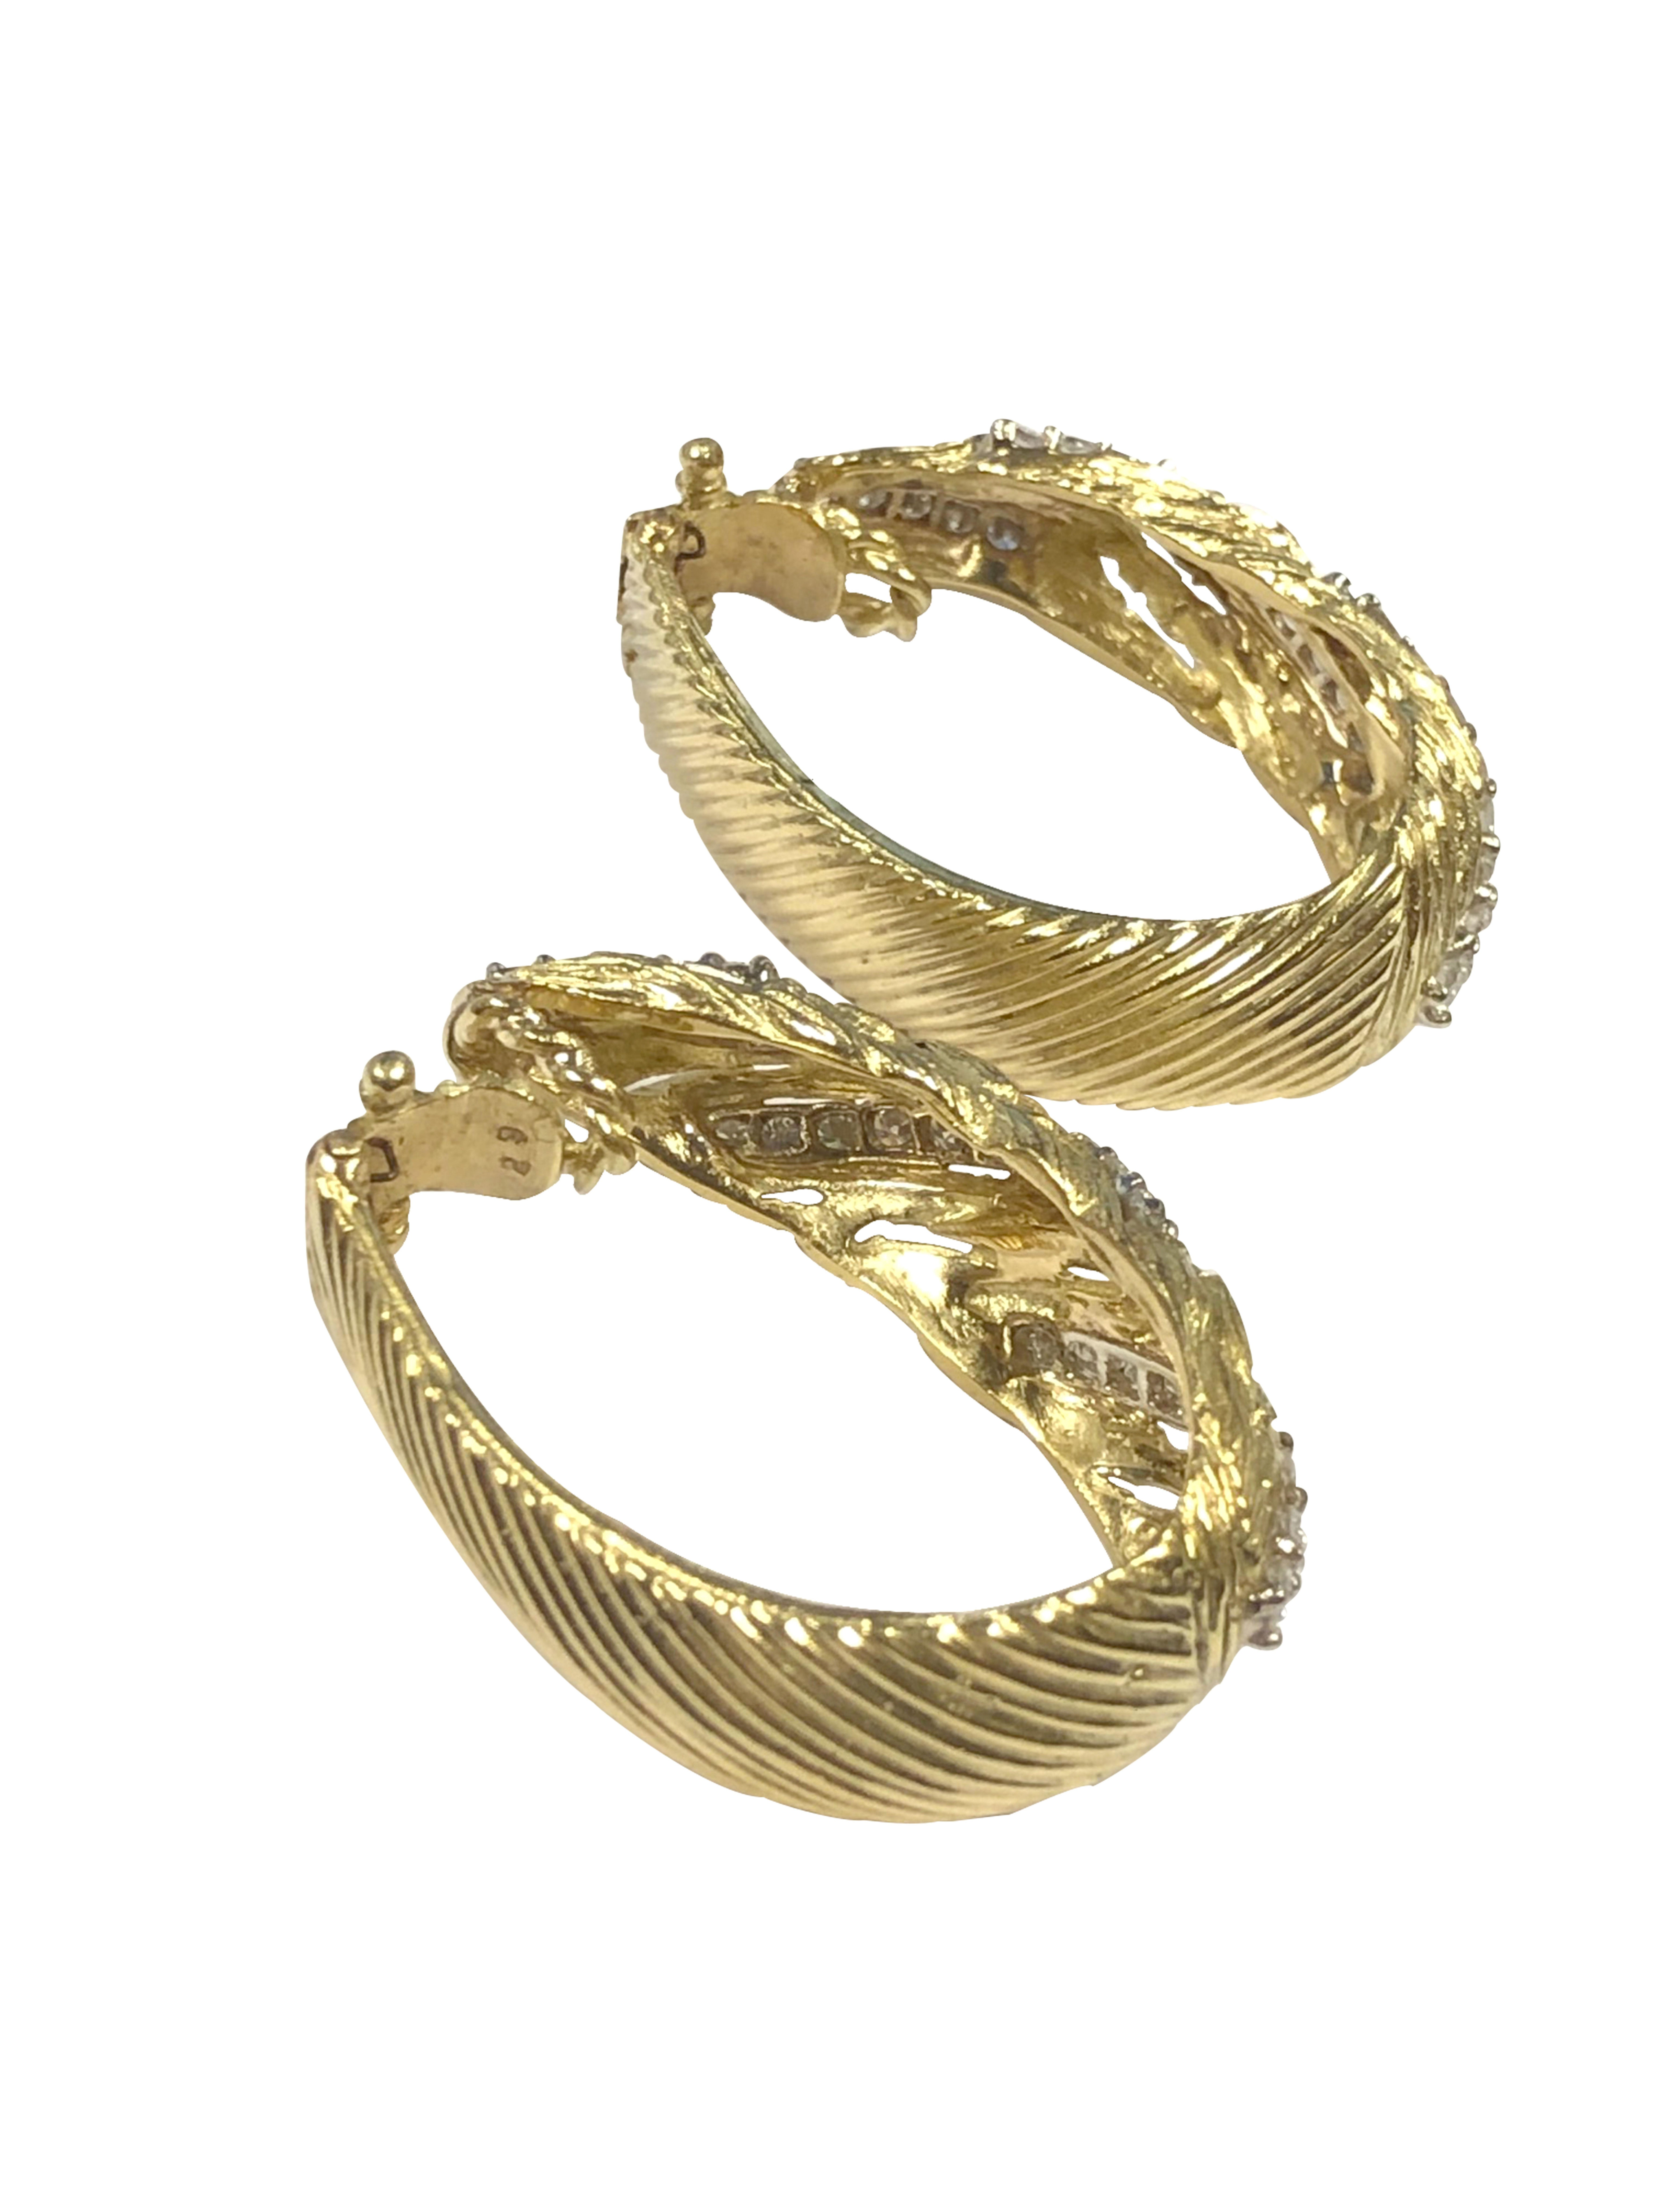 Women's Large Textured Yellow Gold and Diamond Hoop Earrings